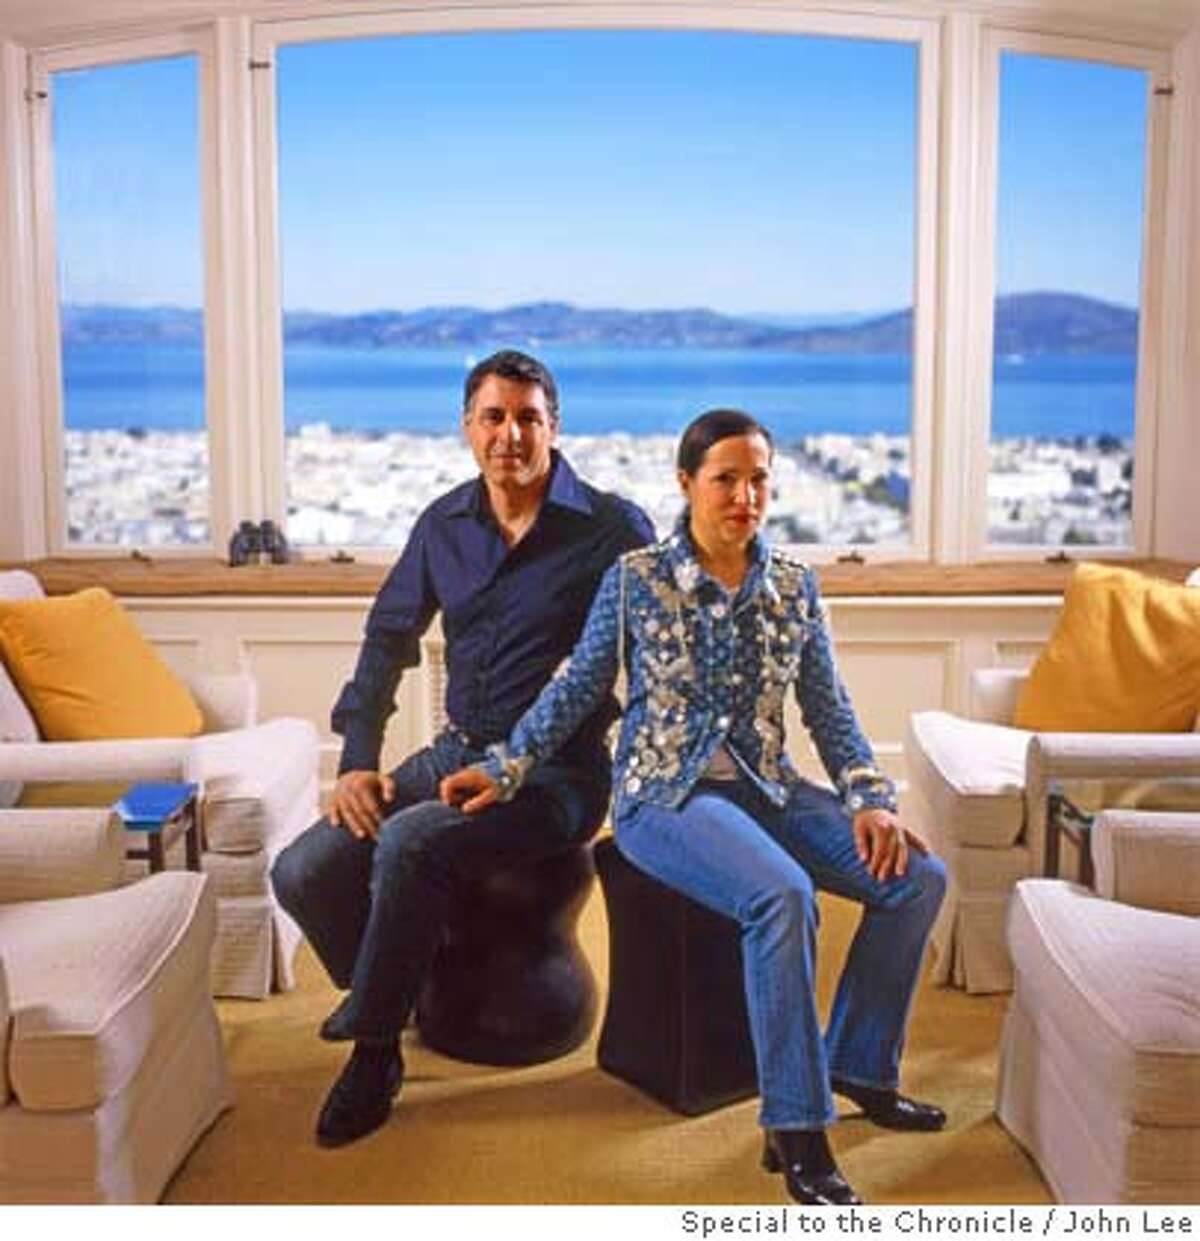 � 2500STEINER_KOUNALAKIS01JOHNLEE.JPG Markos Kounalakis (cq), left, and his wife Eleni Tsakopoulos-Kounalakis, sitting in the living room at 2500 Steiner in San Francisco's Pacific Heights. Behind them are windows looking north out onto the San Francisco Bay. For Sam Whiting story on 2500 Steiner. By JOHN LEE/SPECIAL TO THE CHRONICLE